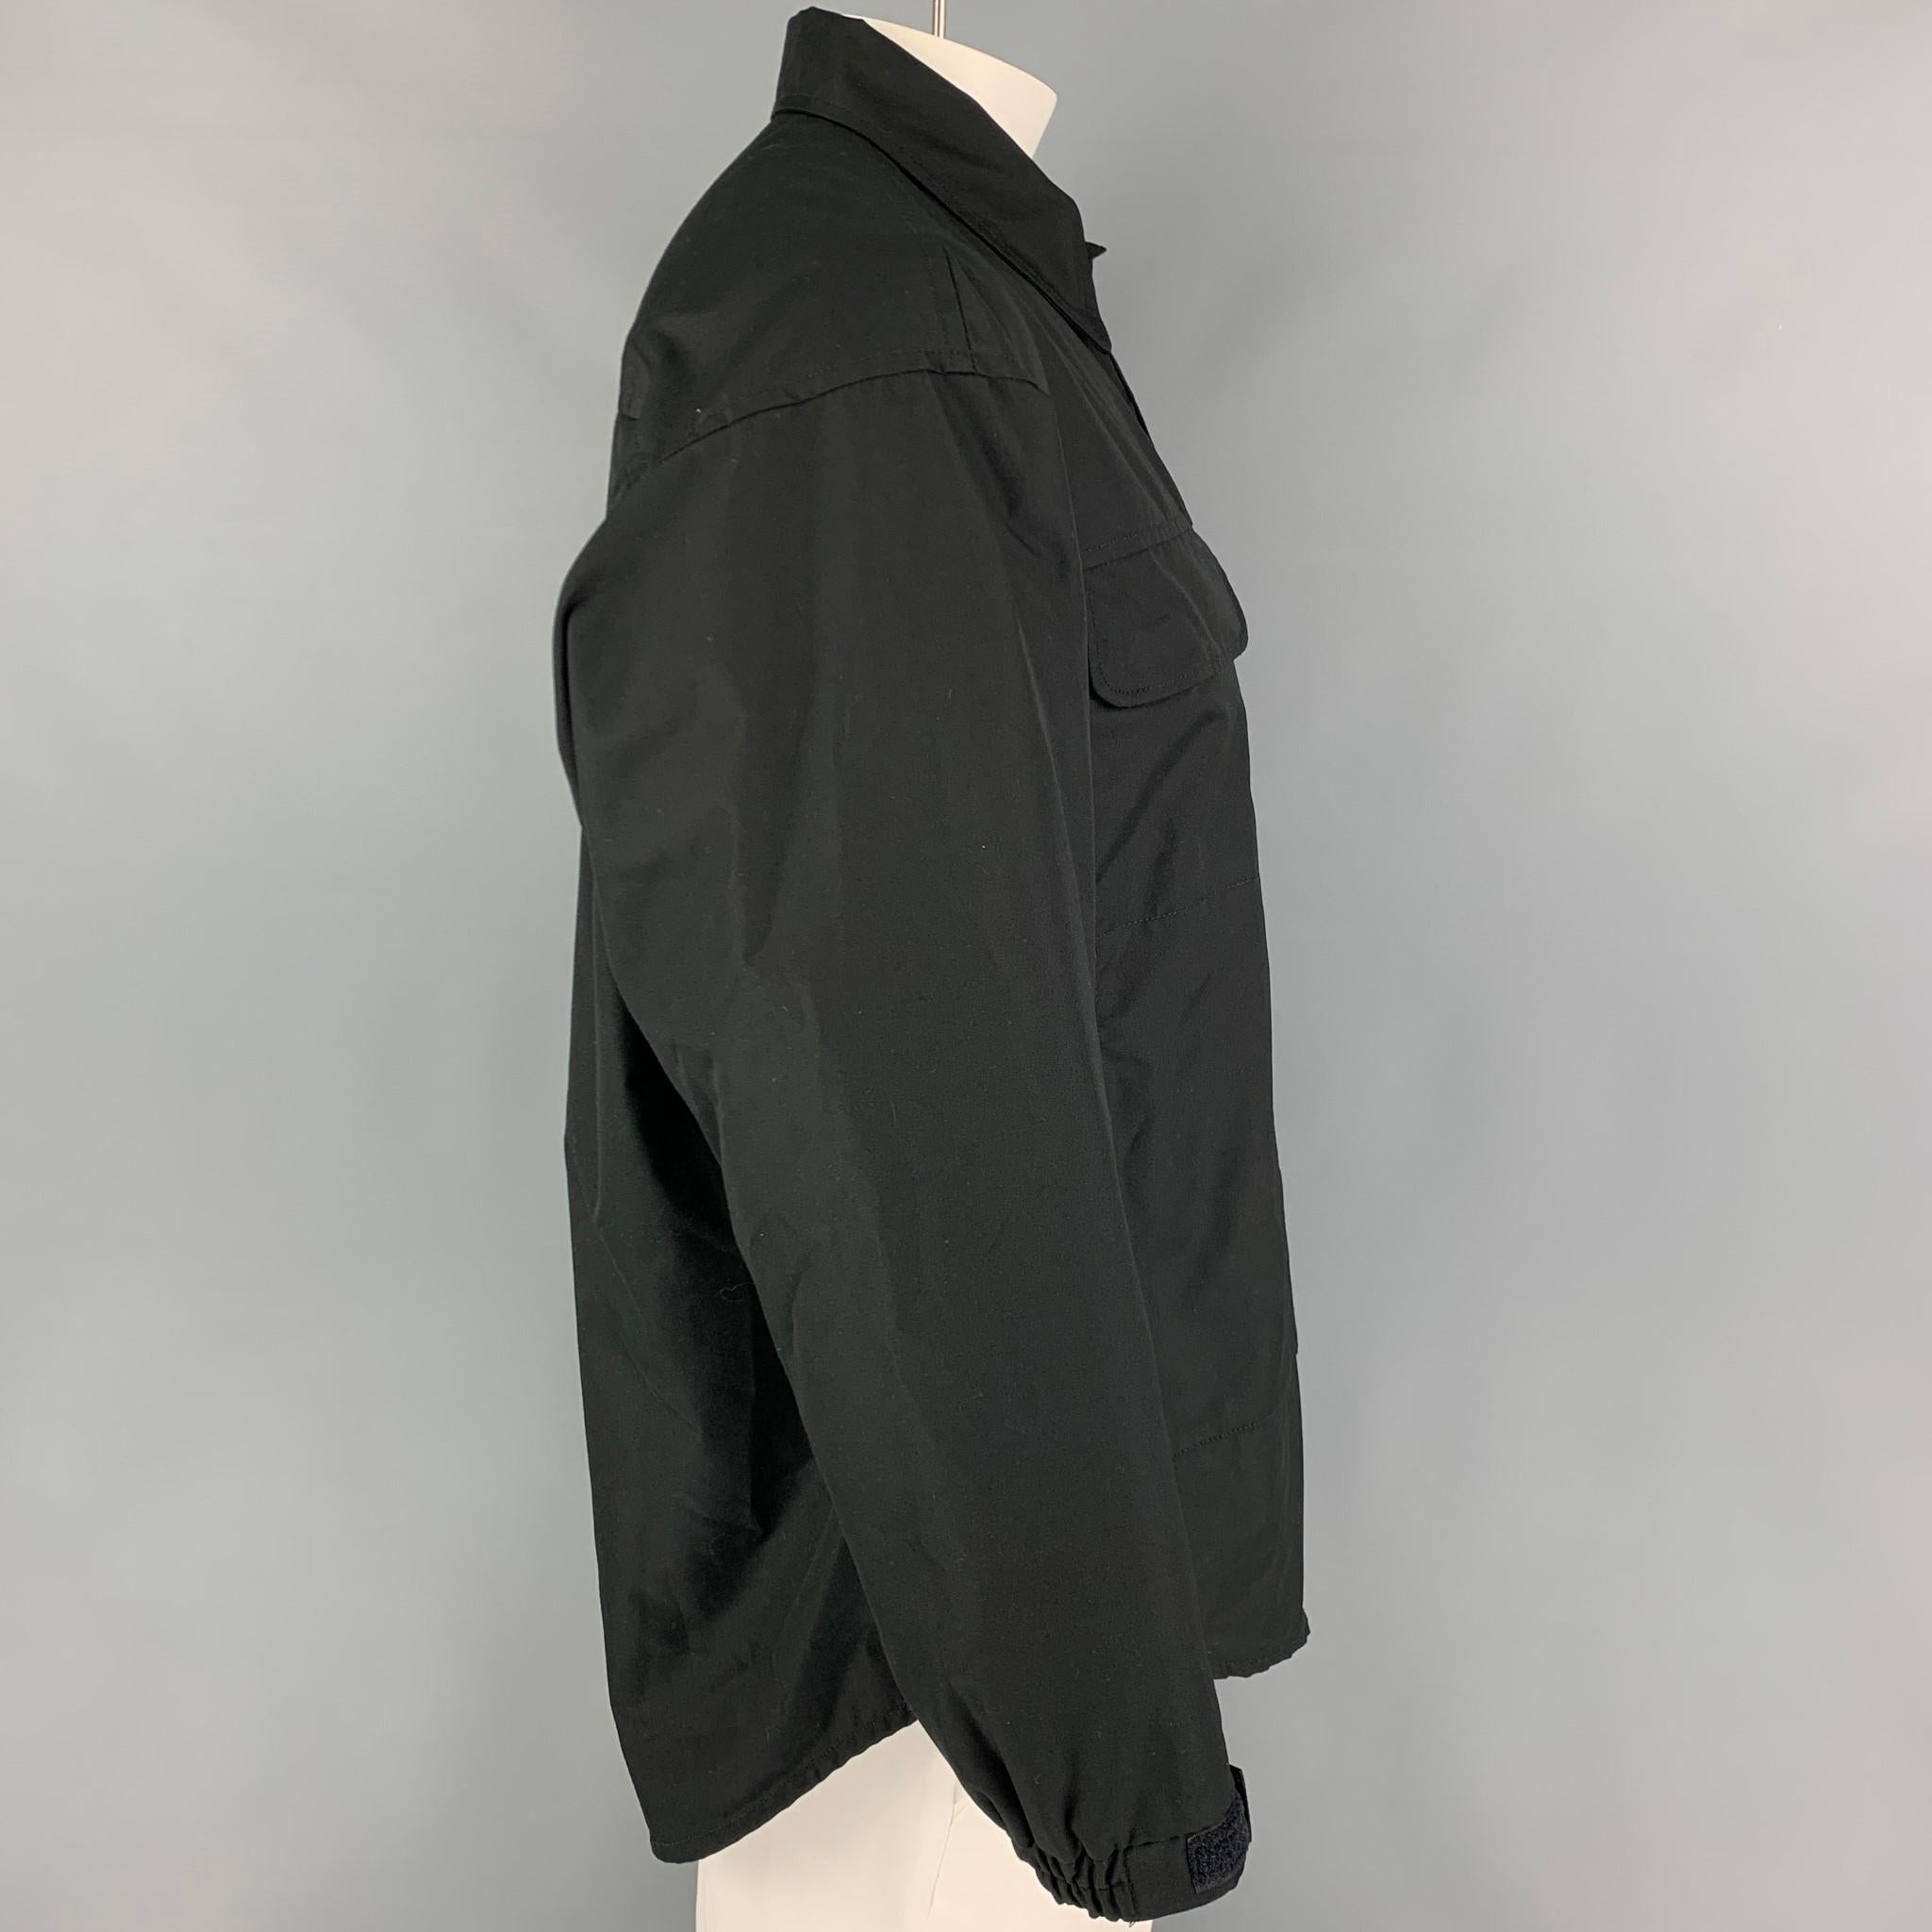 WTAPS jacket comes in a black polyester with a mesh liner featuring a spread collar, front pockets, and a hidden placket closure. Made in Japan. 

Excellent Pre-Owned Condition.
Marked: X2 02

Measurements:

Shoulder: 22 in.
Chest: 52 in.
Sleeve: 22